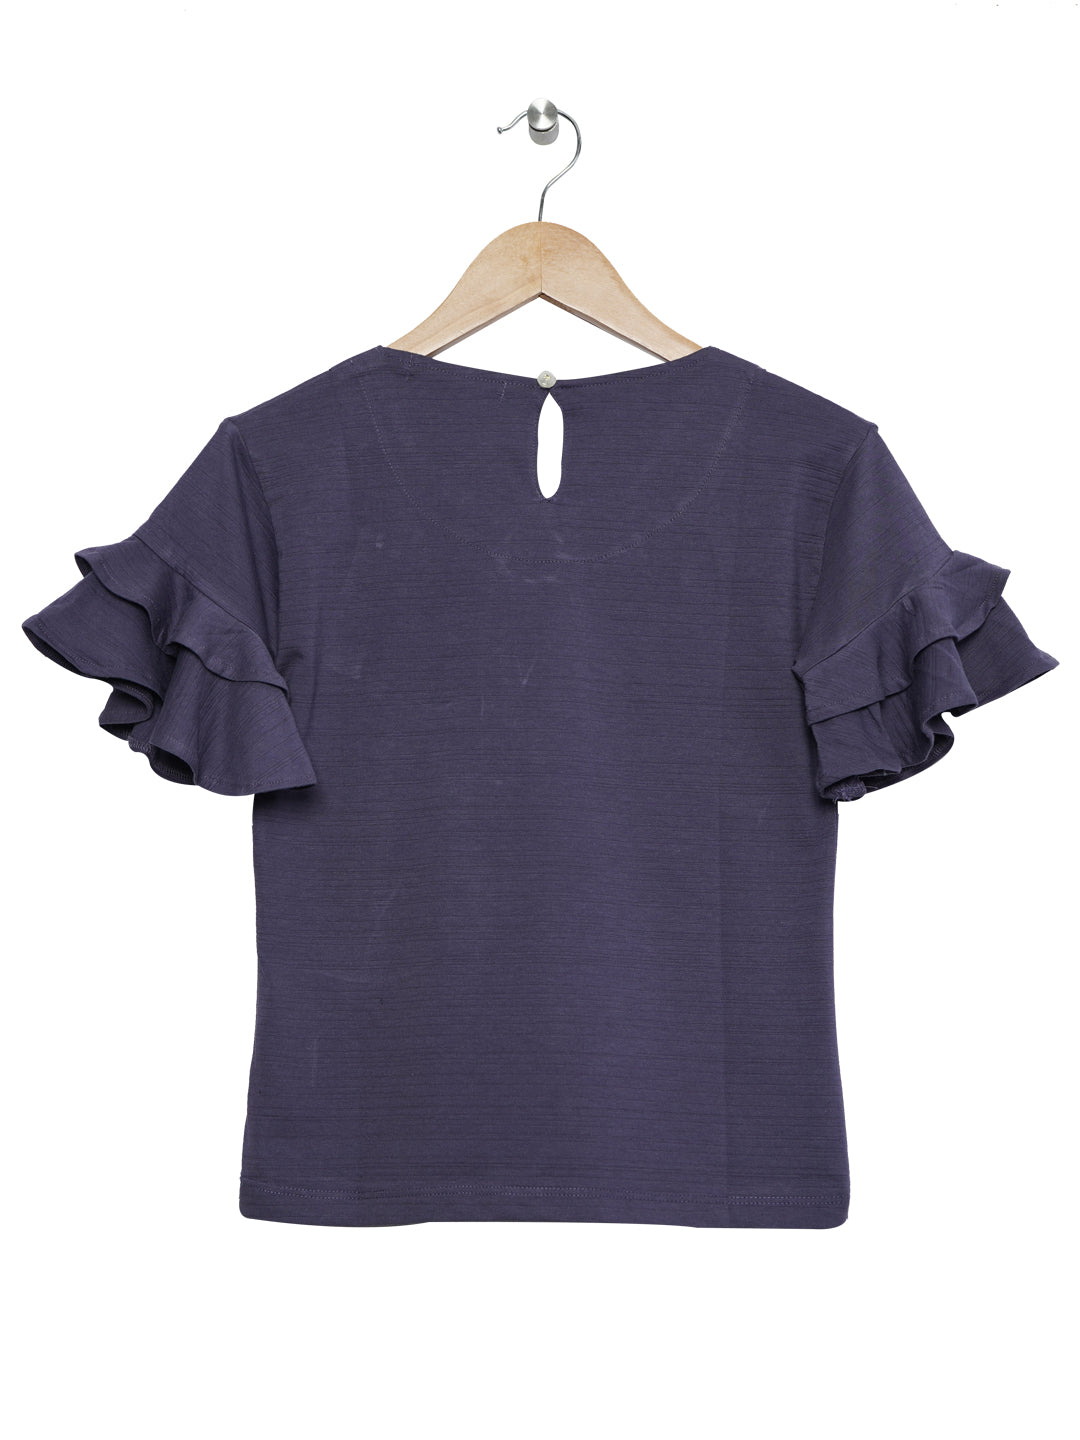 Pampolina Girls Solid Top With Puffed Sleeve -Dark Grey